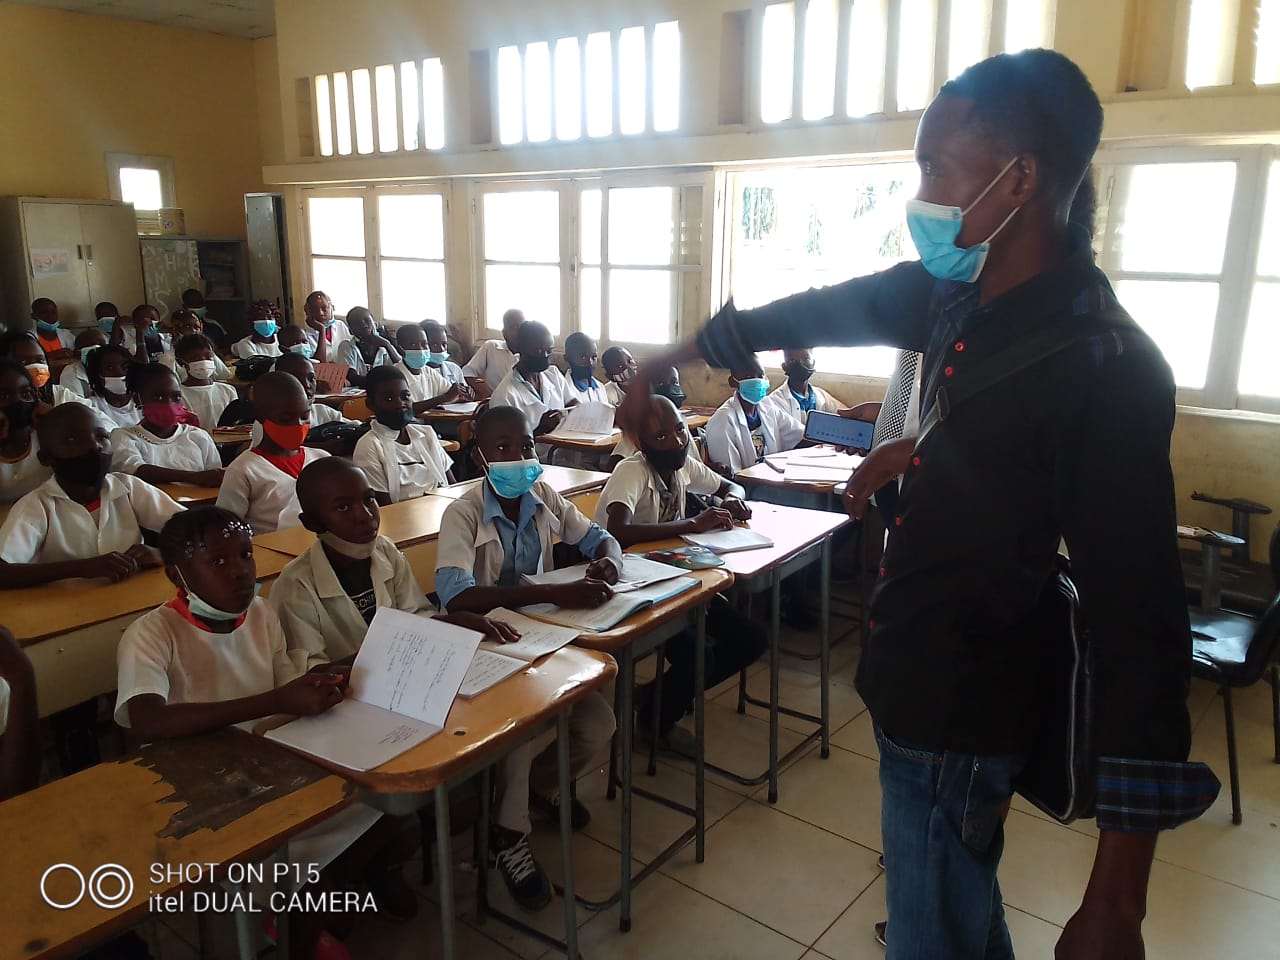 TCE Zaire: A school health agent giving a talk about the correct use of masks and handwashing to prevent Covid-19